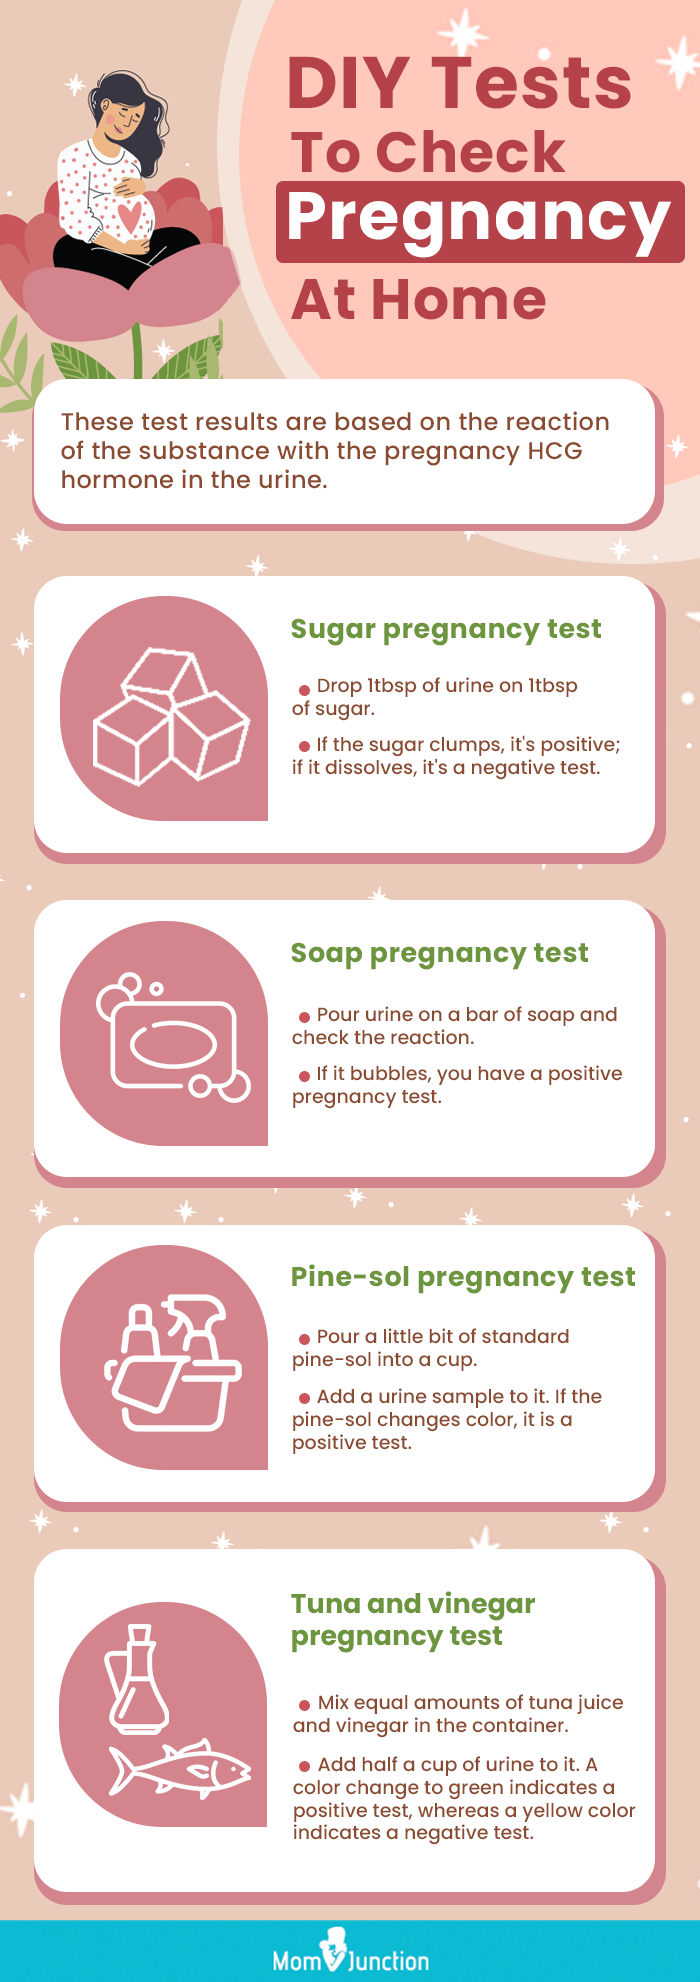 Homemade pregnancy test using urine and bleach - it really works!!! 